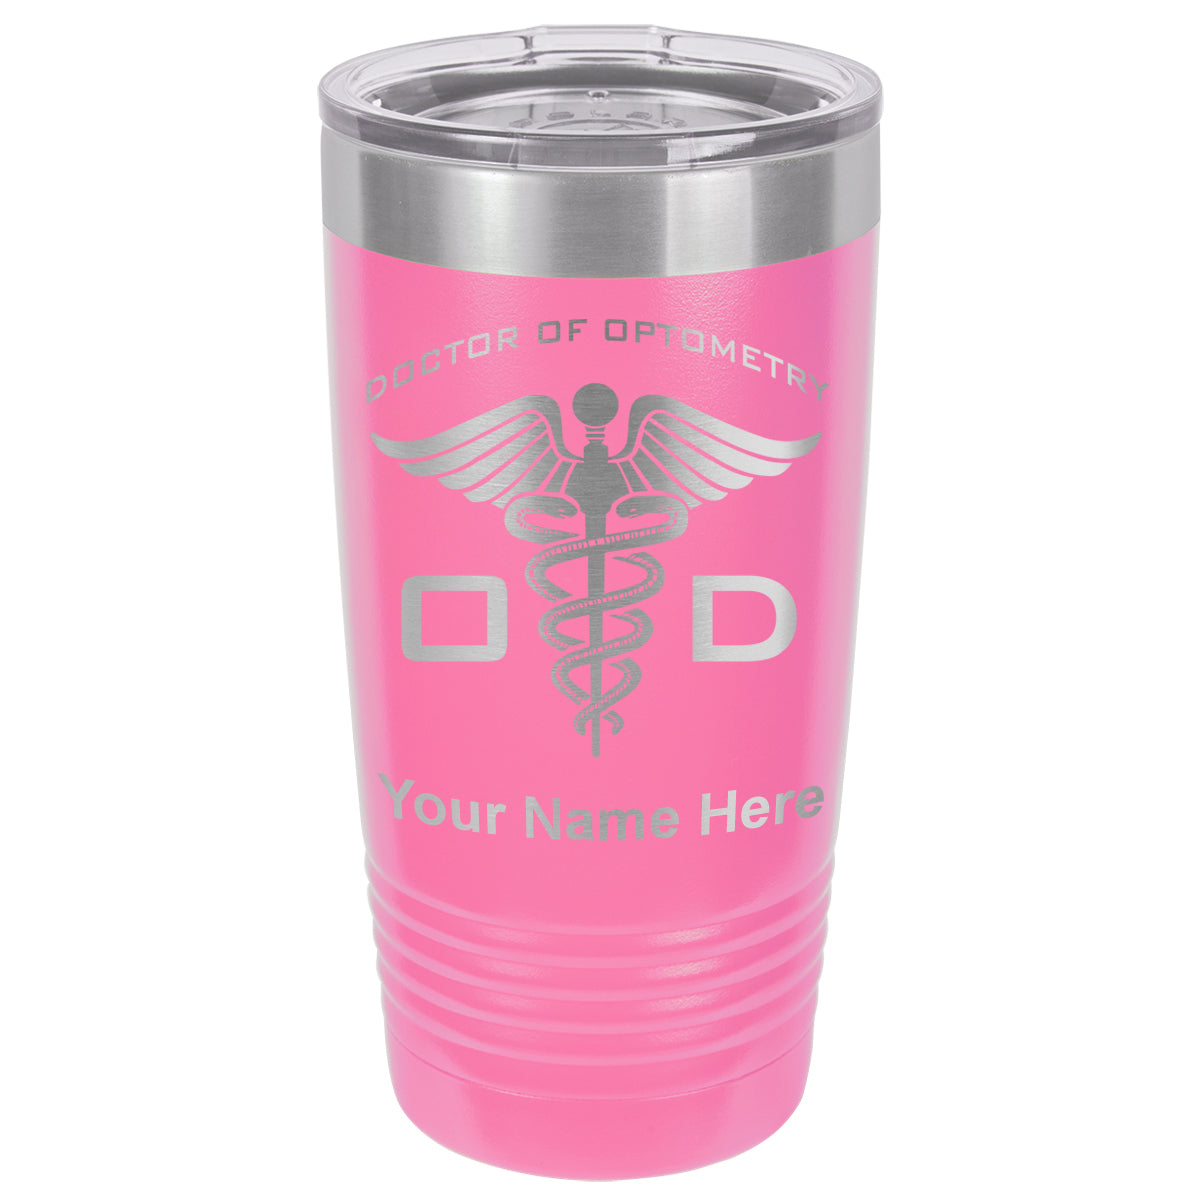 20oz Vacuum Insulated Tumbler Mug, OD Doctor of Optometry, Personalized Engraving Included